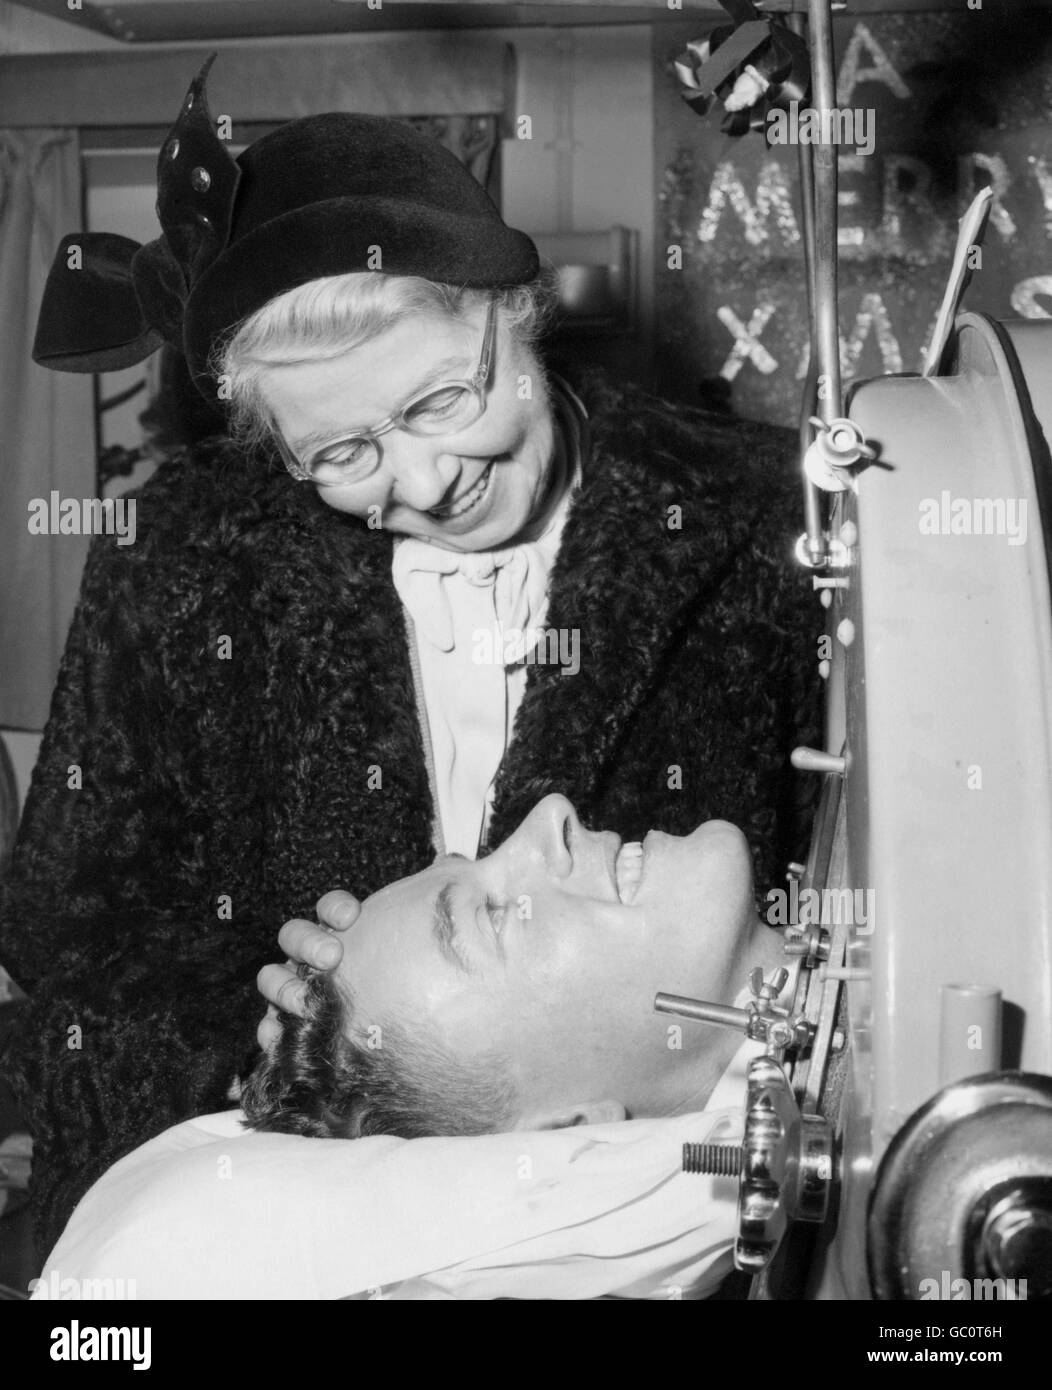 John Taylor, a 28-year-old polio victim, is greeted by his mother when he arrived in an iron lung aboard the liner Rangitane at Southampton from the Panama Canal zone. John was stricken with polio when working in an oil field in Ecuador. Stock Photo